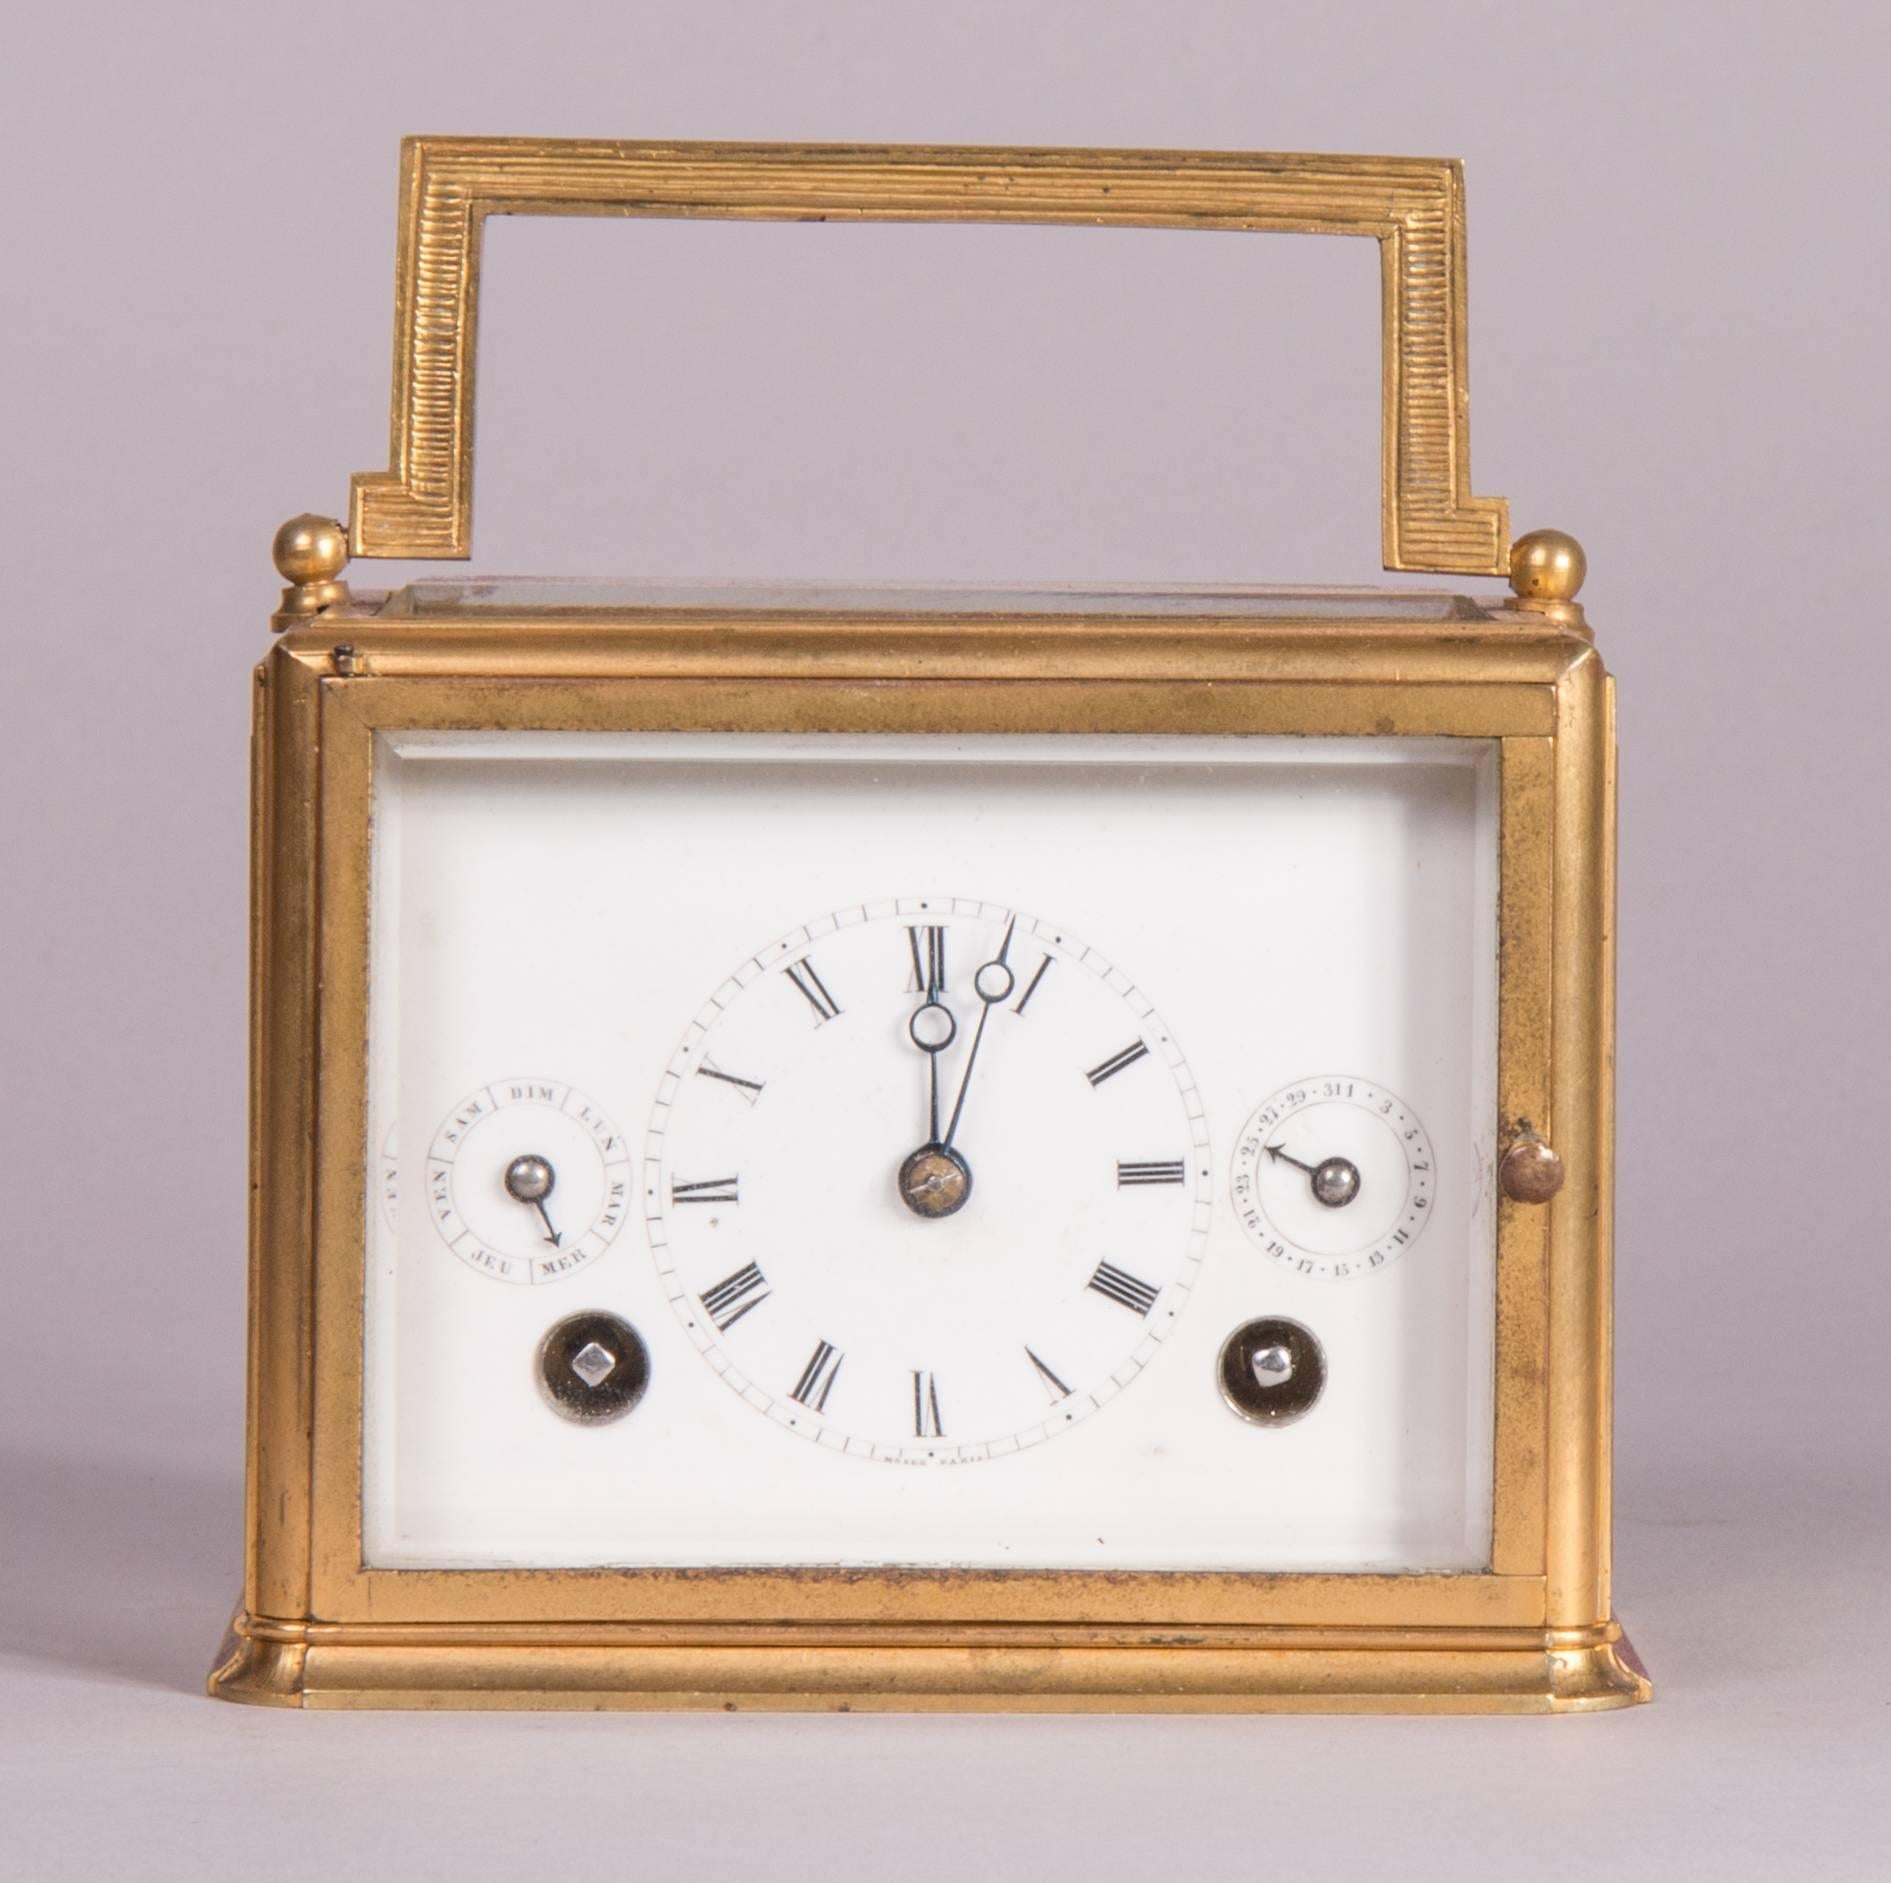 Signed "Moser Paris".
Gilt brass case, enamel dial, indication of date and weekdays, blued steel hands, twin spring barrel movement with outside count wheel strike on coiled steel gong.
Engraved on the rear door: “This clock was